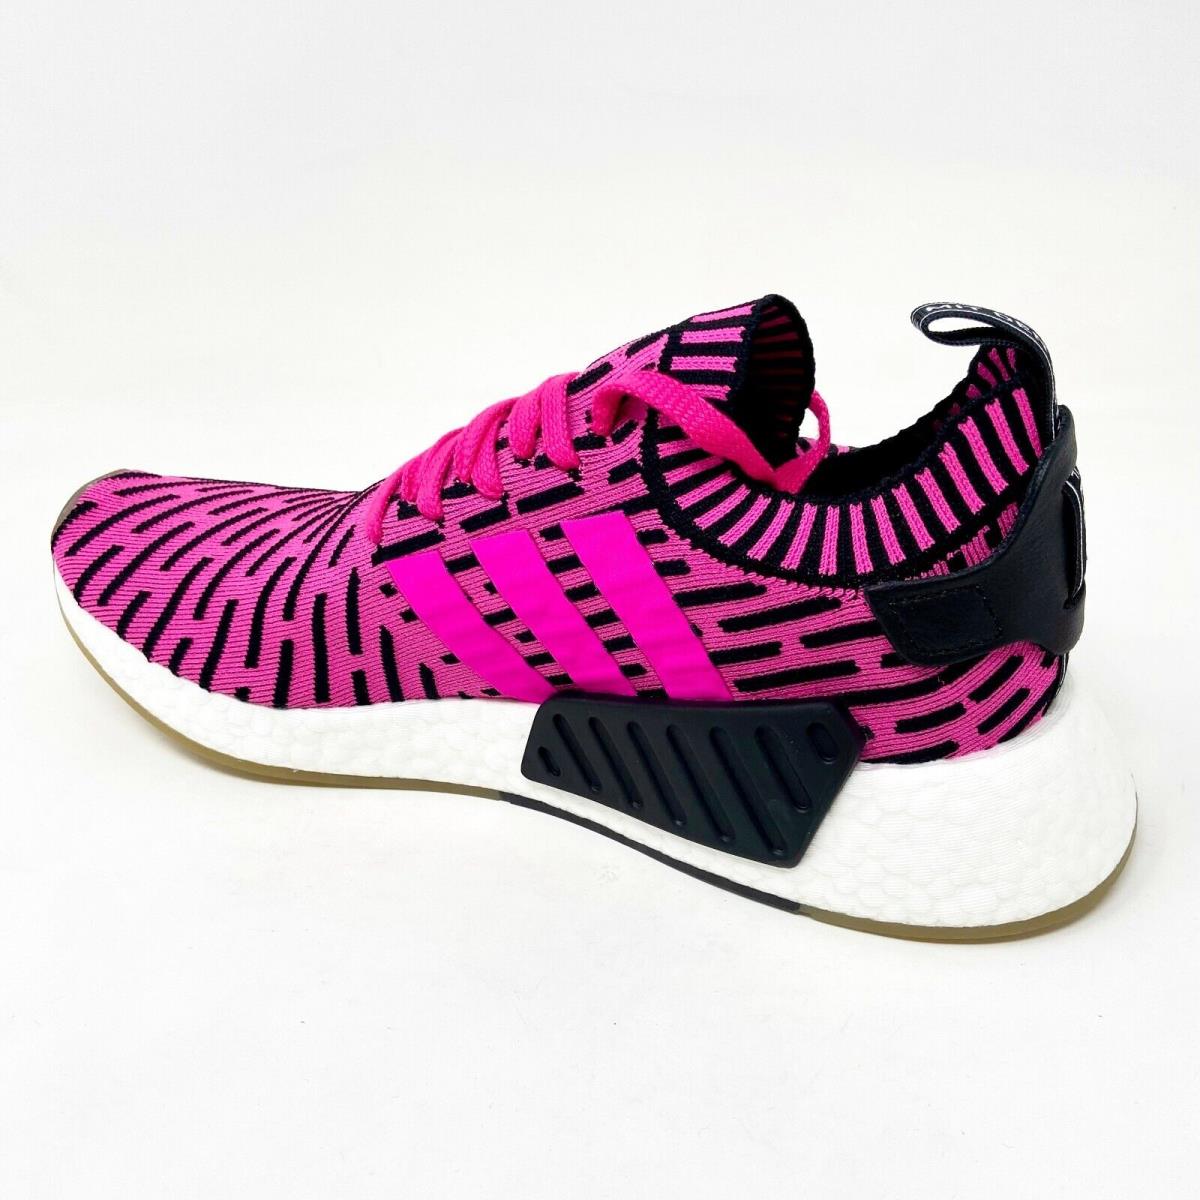 Adidas shoes NMD - Pink 1